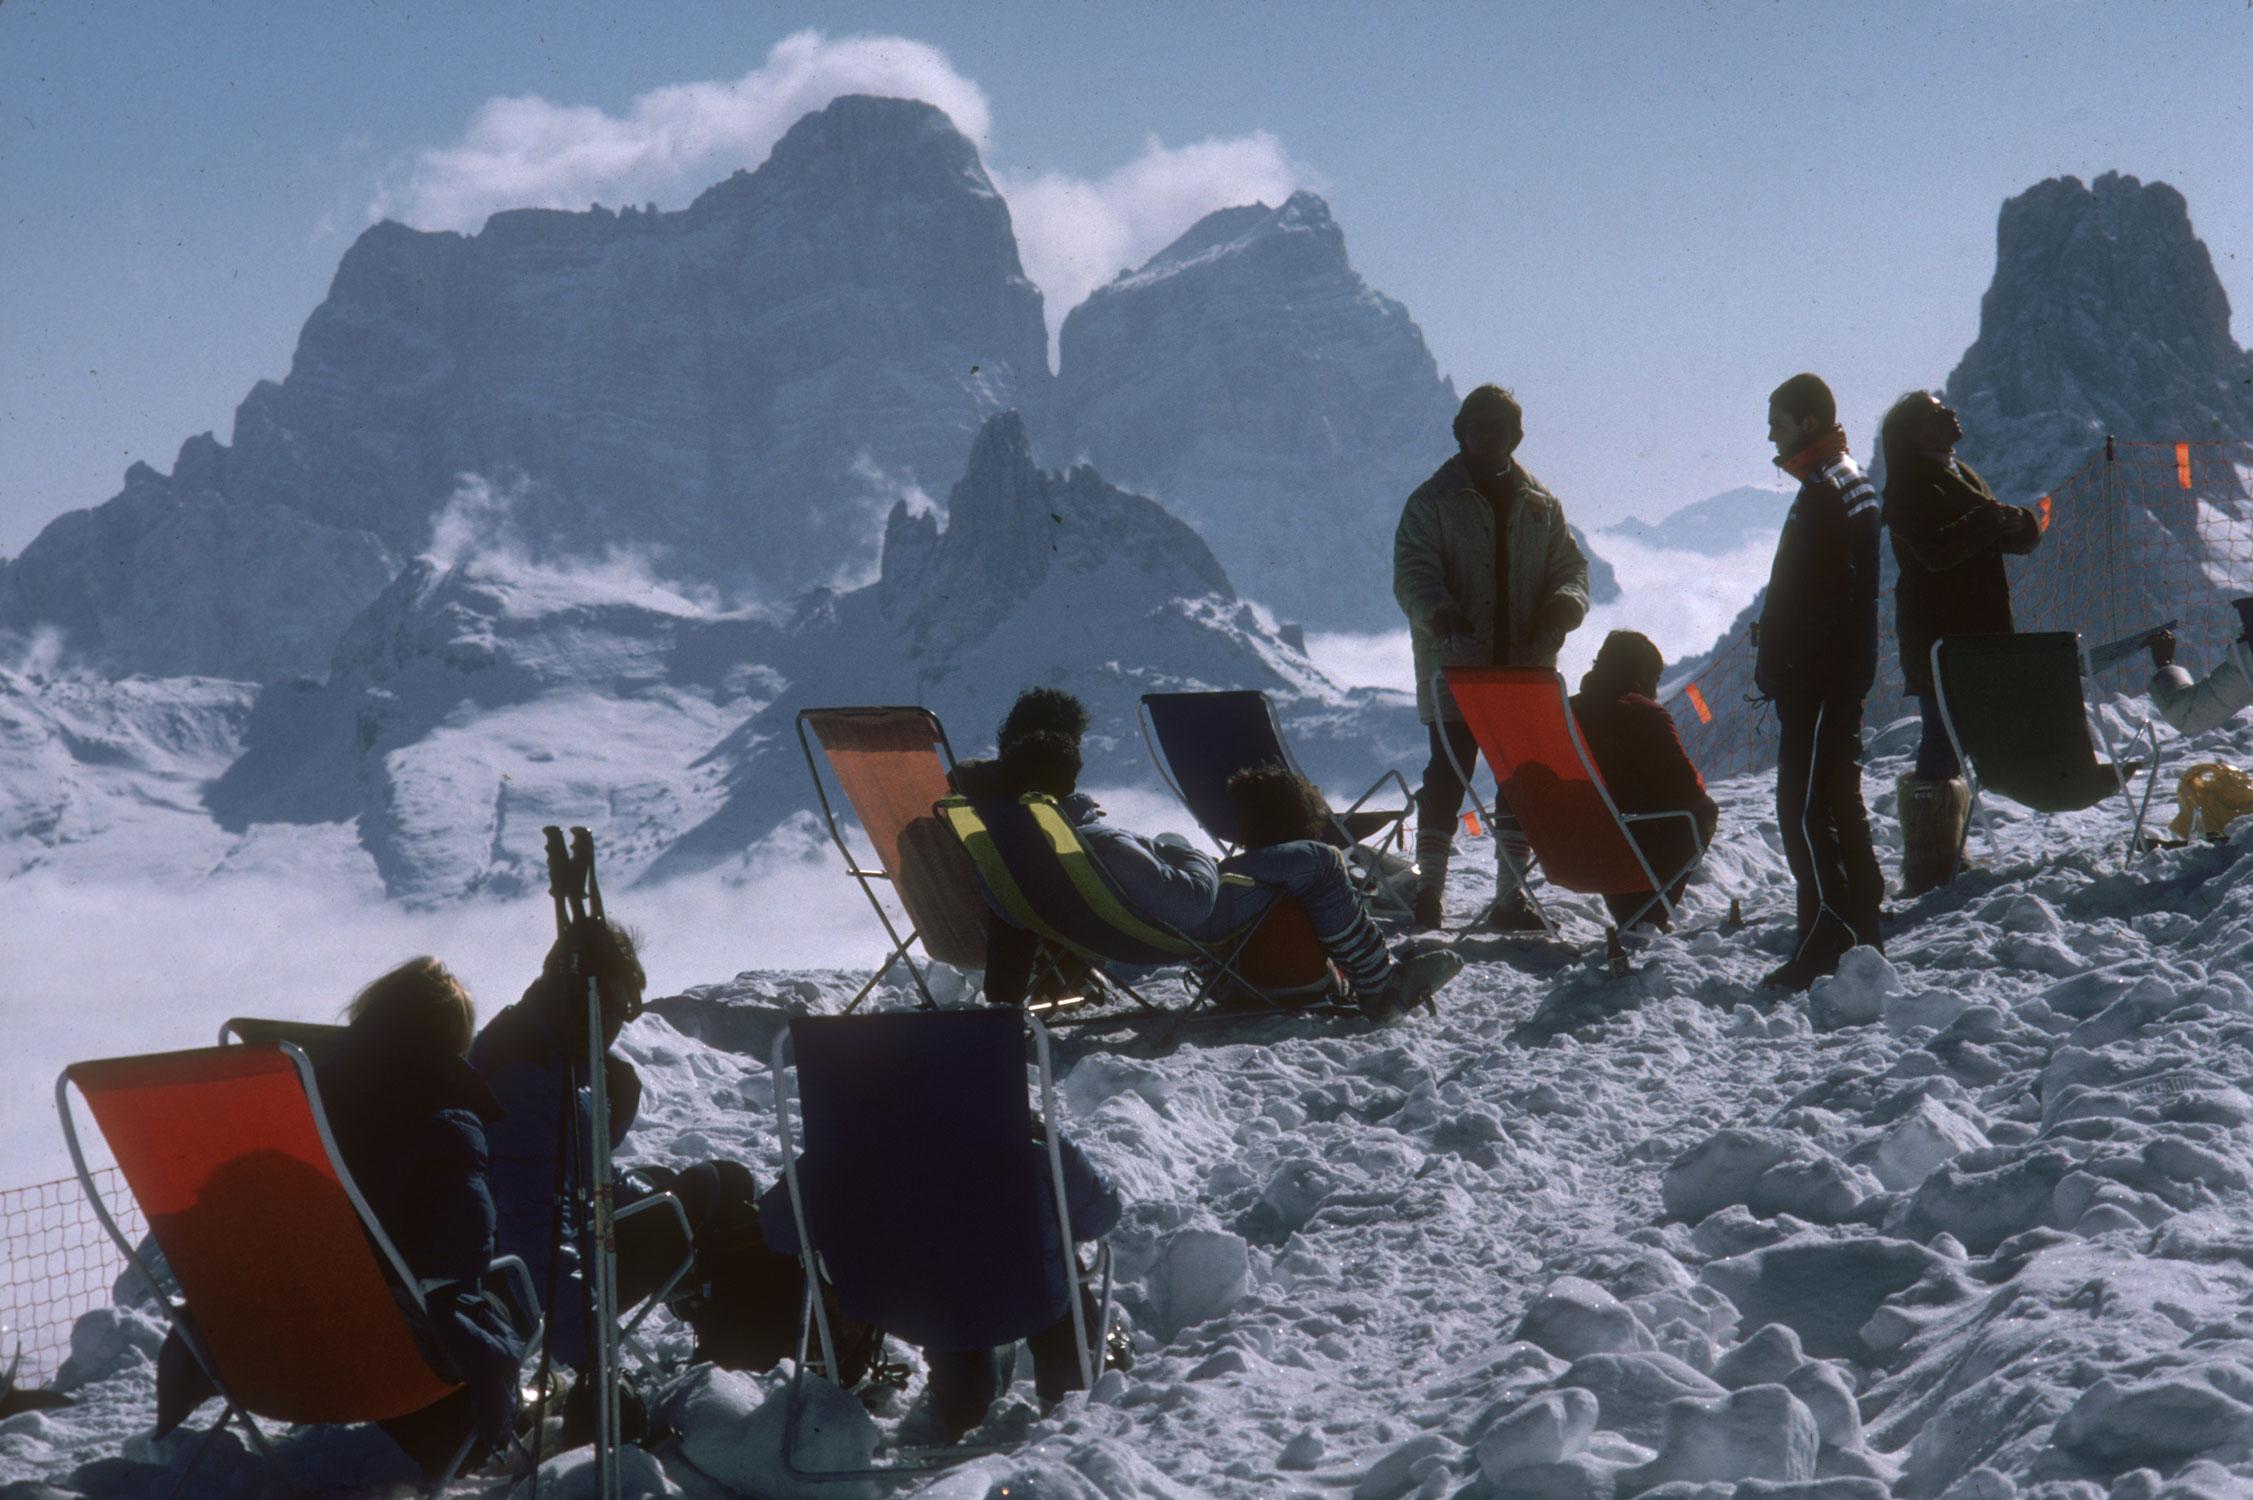 Slim Aarons
Cortina d'Ampezzo
1982 (printed later)
C print 
Estate stamped and numbered edition of 150 
with Certificate of authenticity

A rest from skiing at Cortina d'Ampezzo, March 1982. (Photo by Slim Aarons/Hulton Archive/Getty Images)

Slim